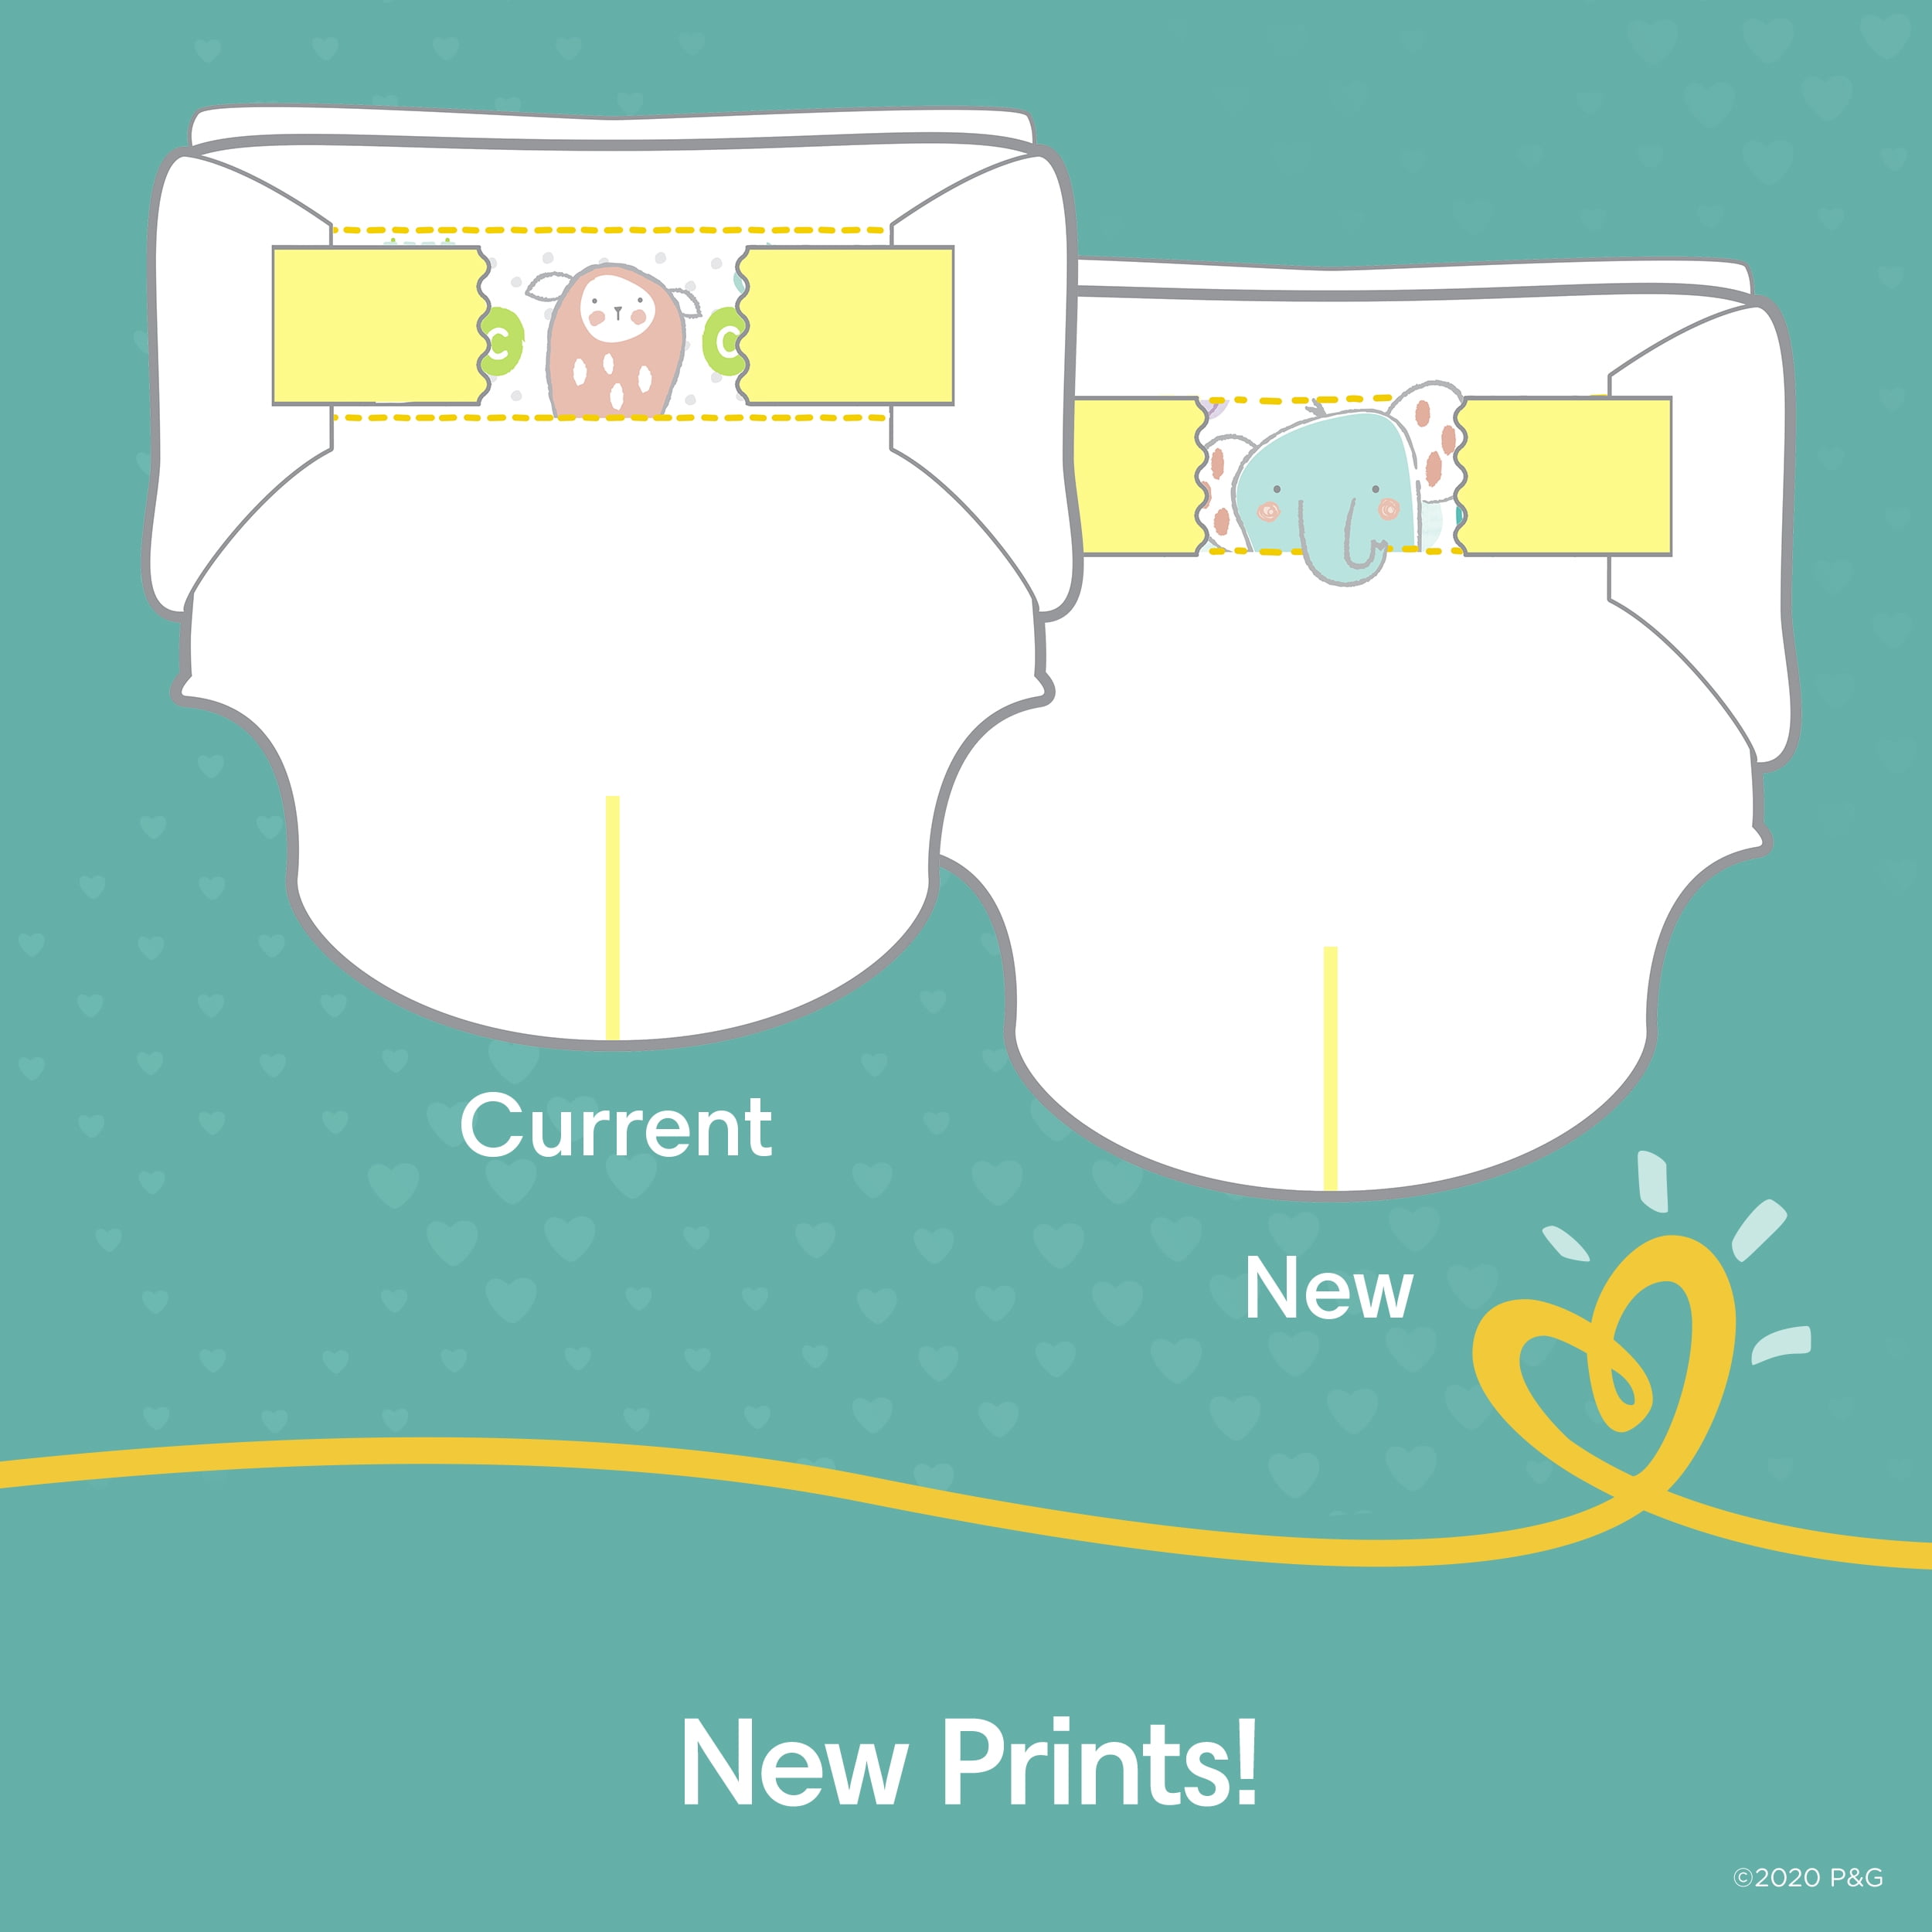 Pampers - 192 Couches-Culottes Baby-Dry, Taille 3, 6-11 kg